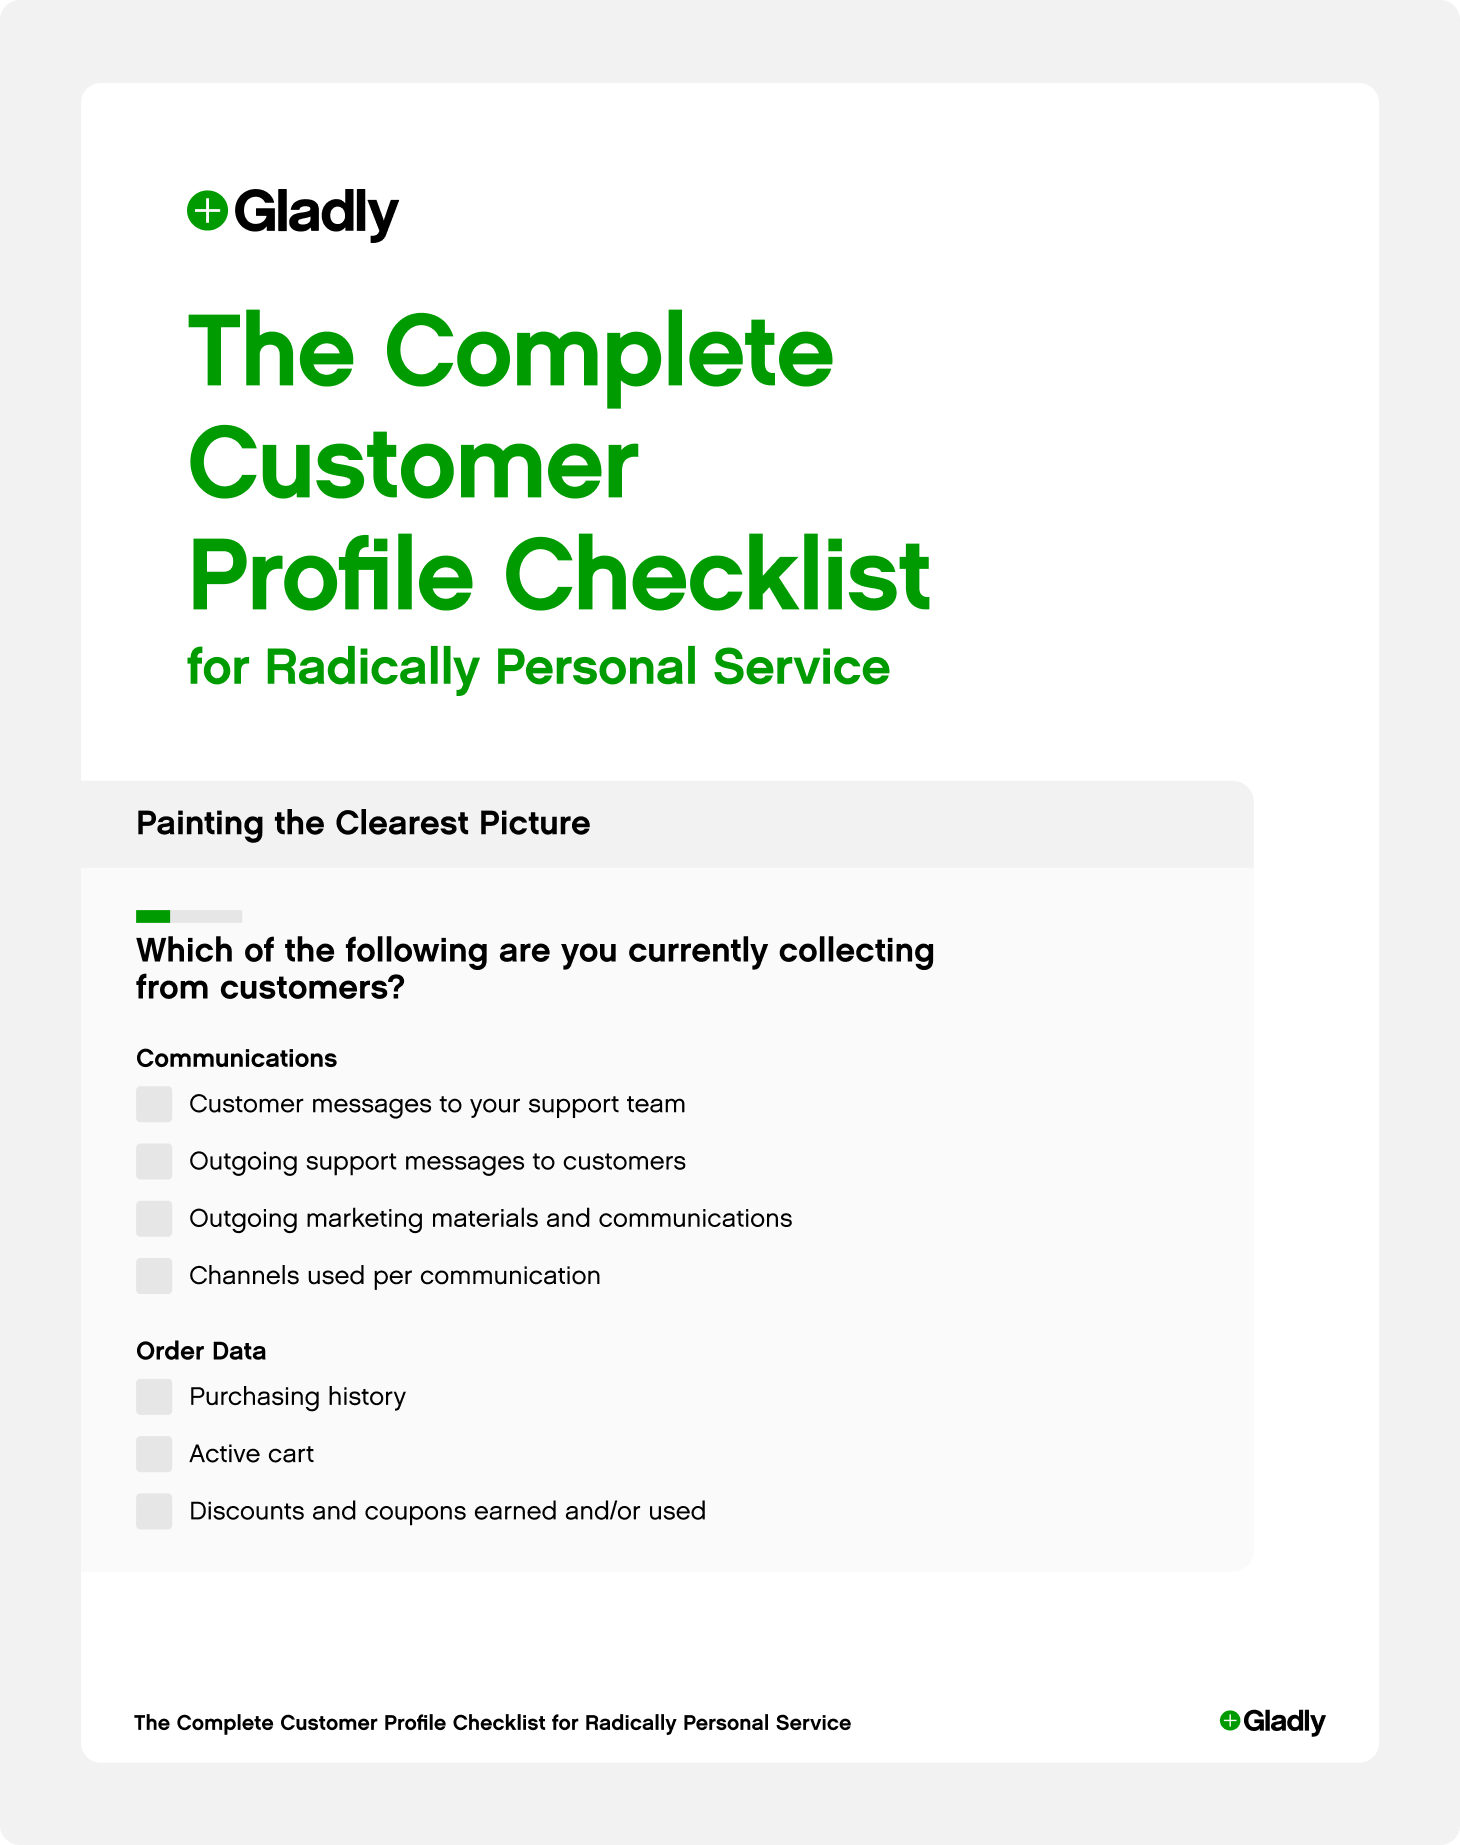 The Complete Customer Profile Checklist for Radically Personal Service